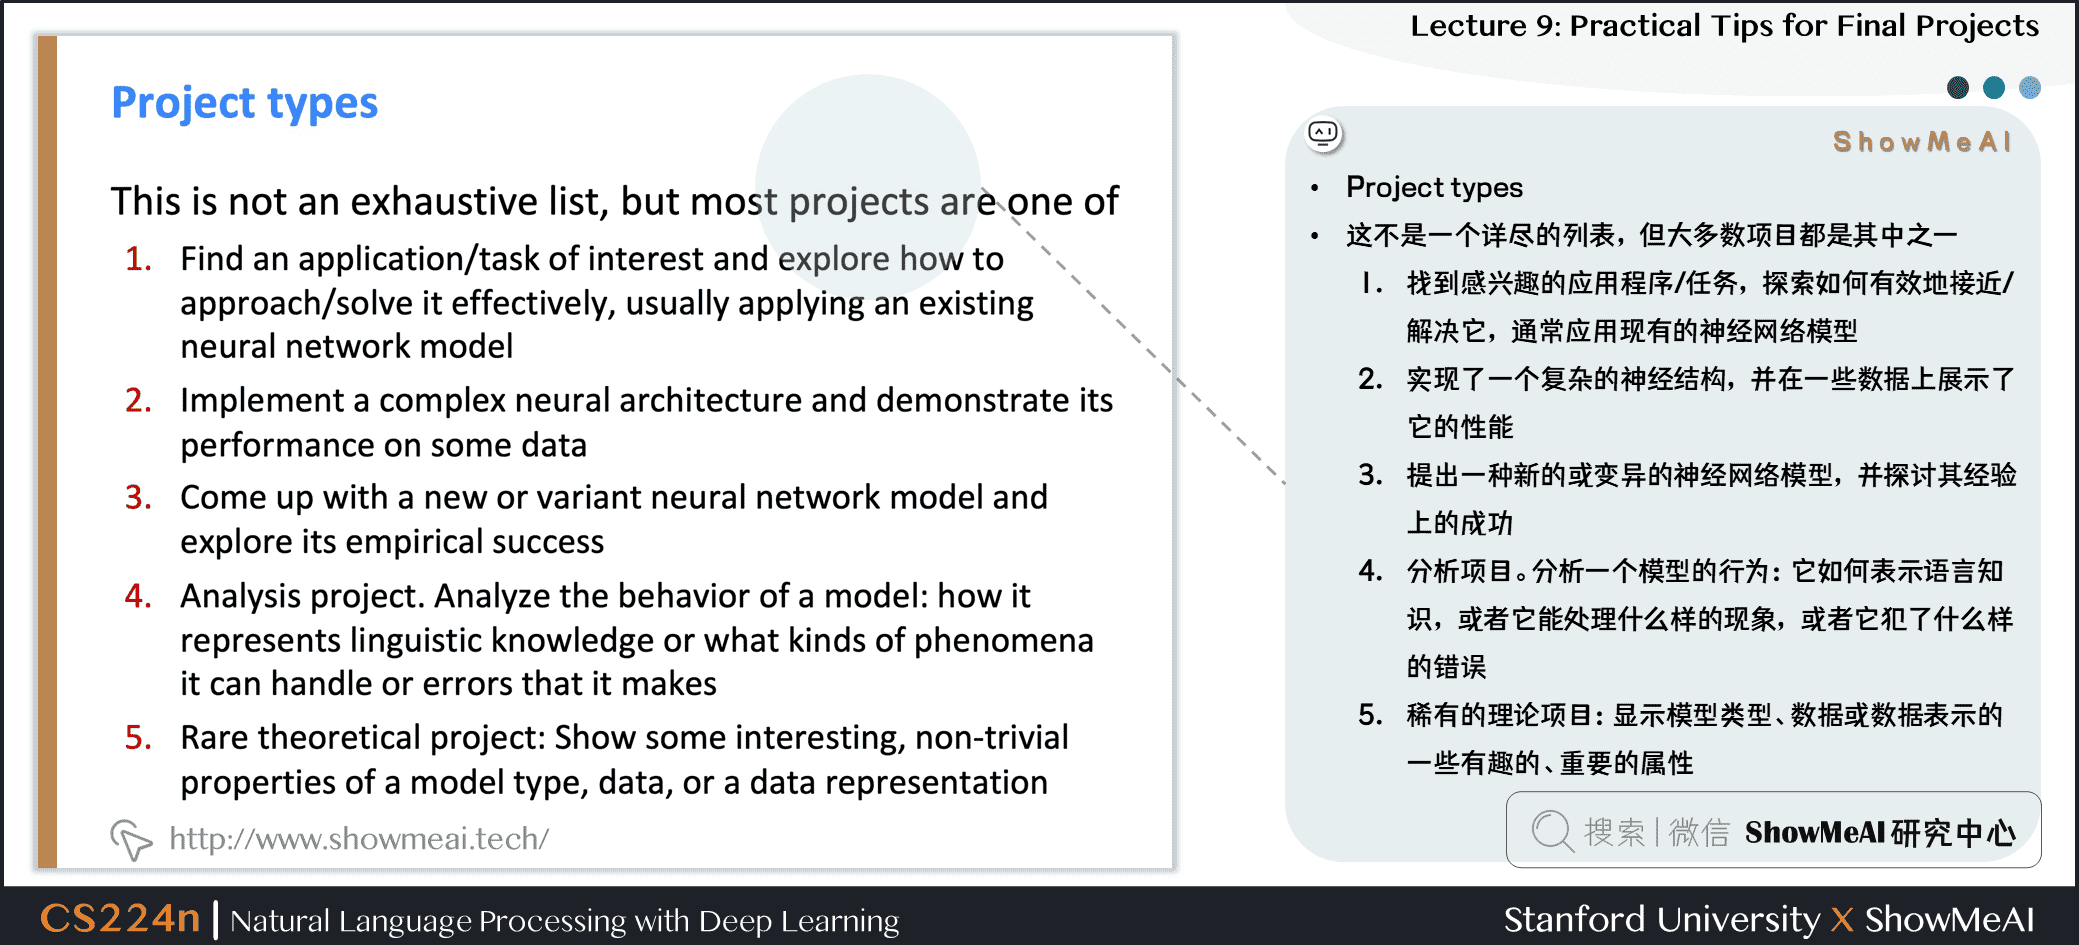 Project types